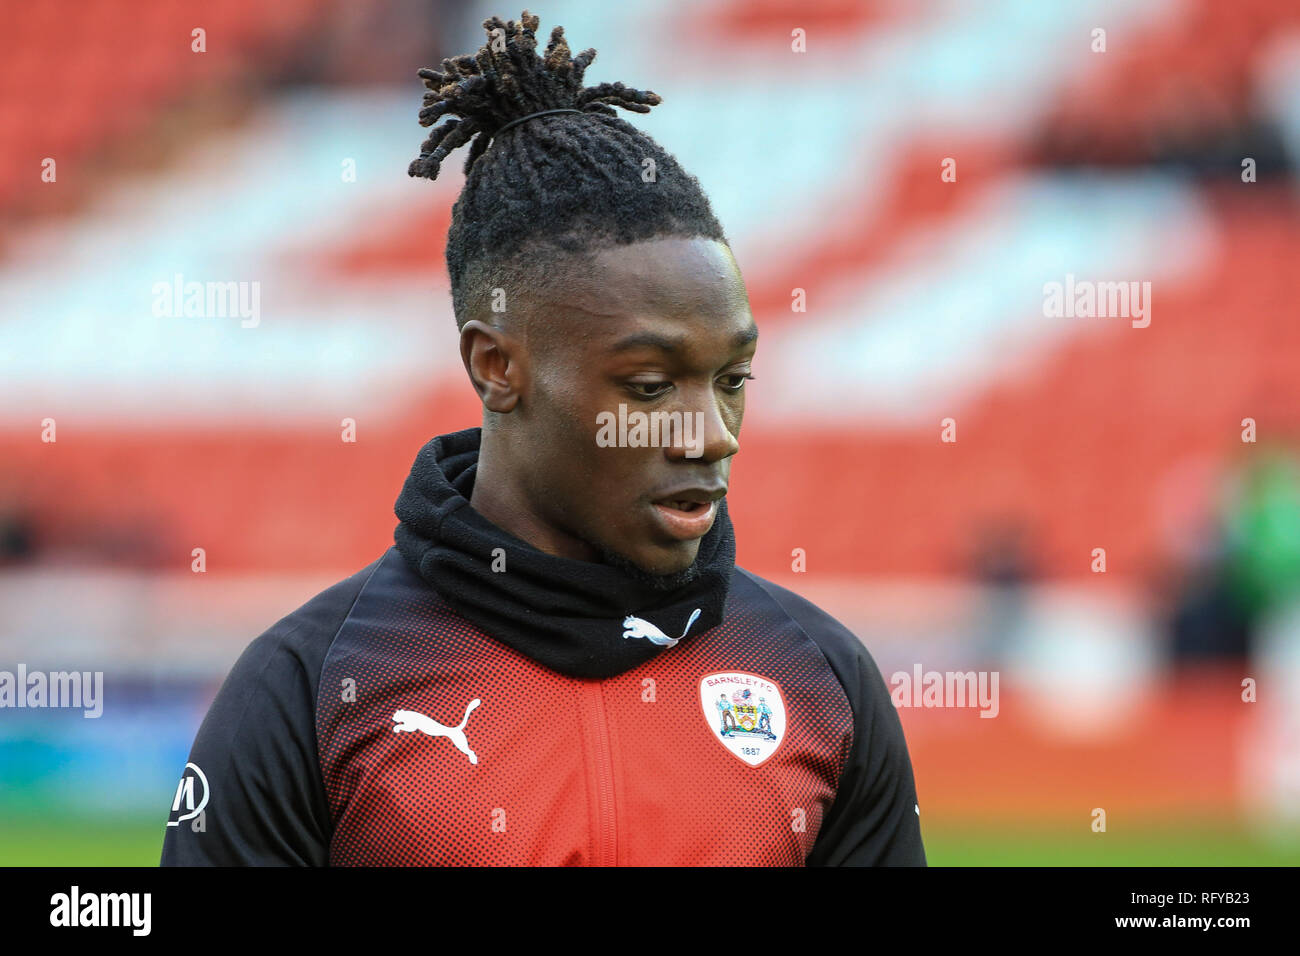 26th January 2019, Oakwell, Barnsley, England; Sky Bet League One, Barnsley vs Rochdale ; Jared Green (15) of Barnsley    Credit: Mark Cosgrove/News Images  English Football League images are subject to DataCo Licence Stock Photo